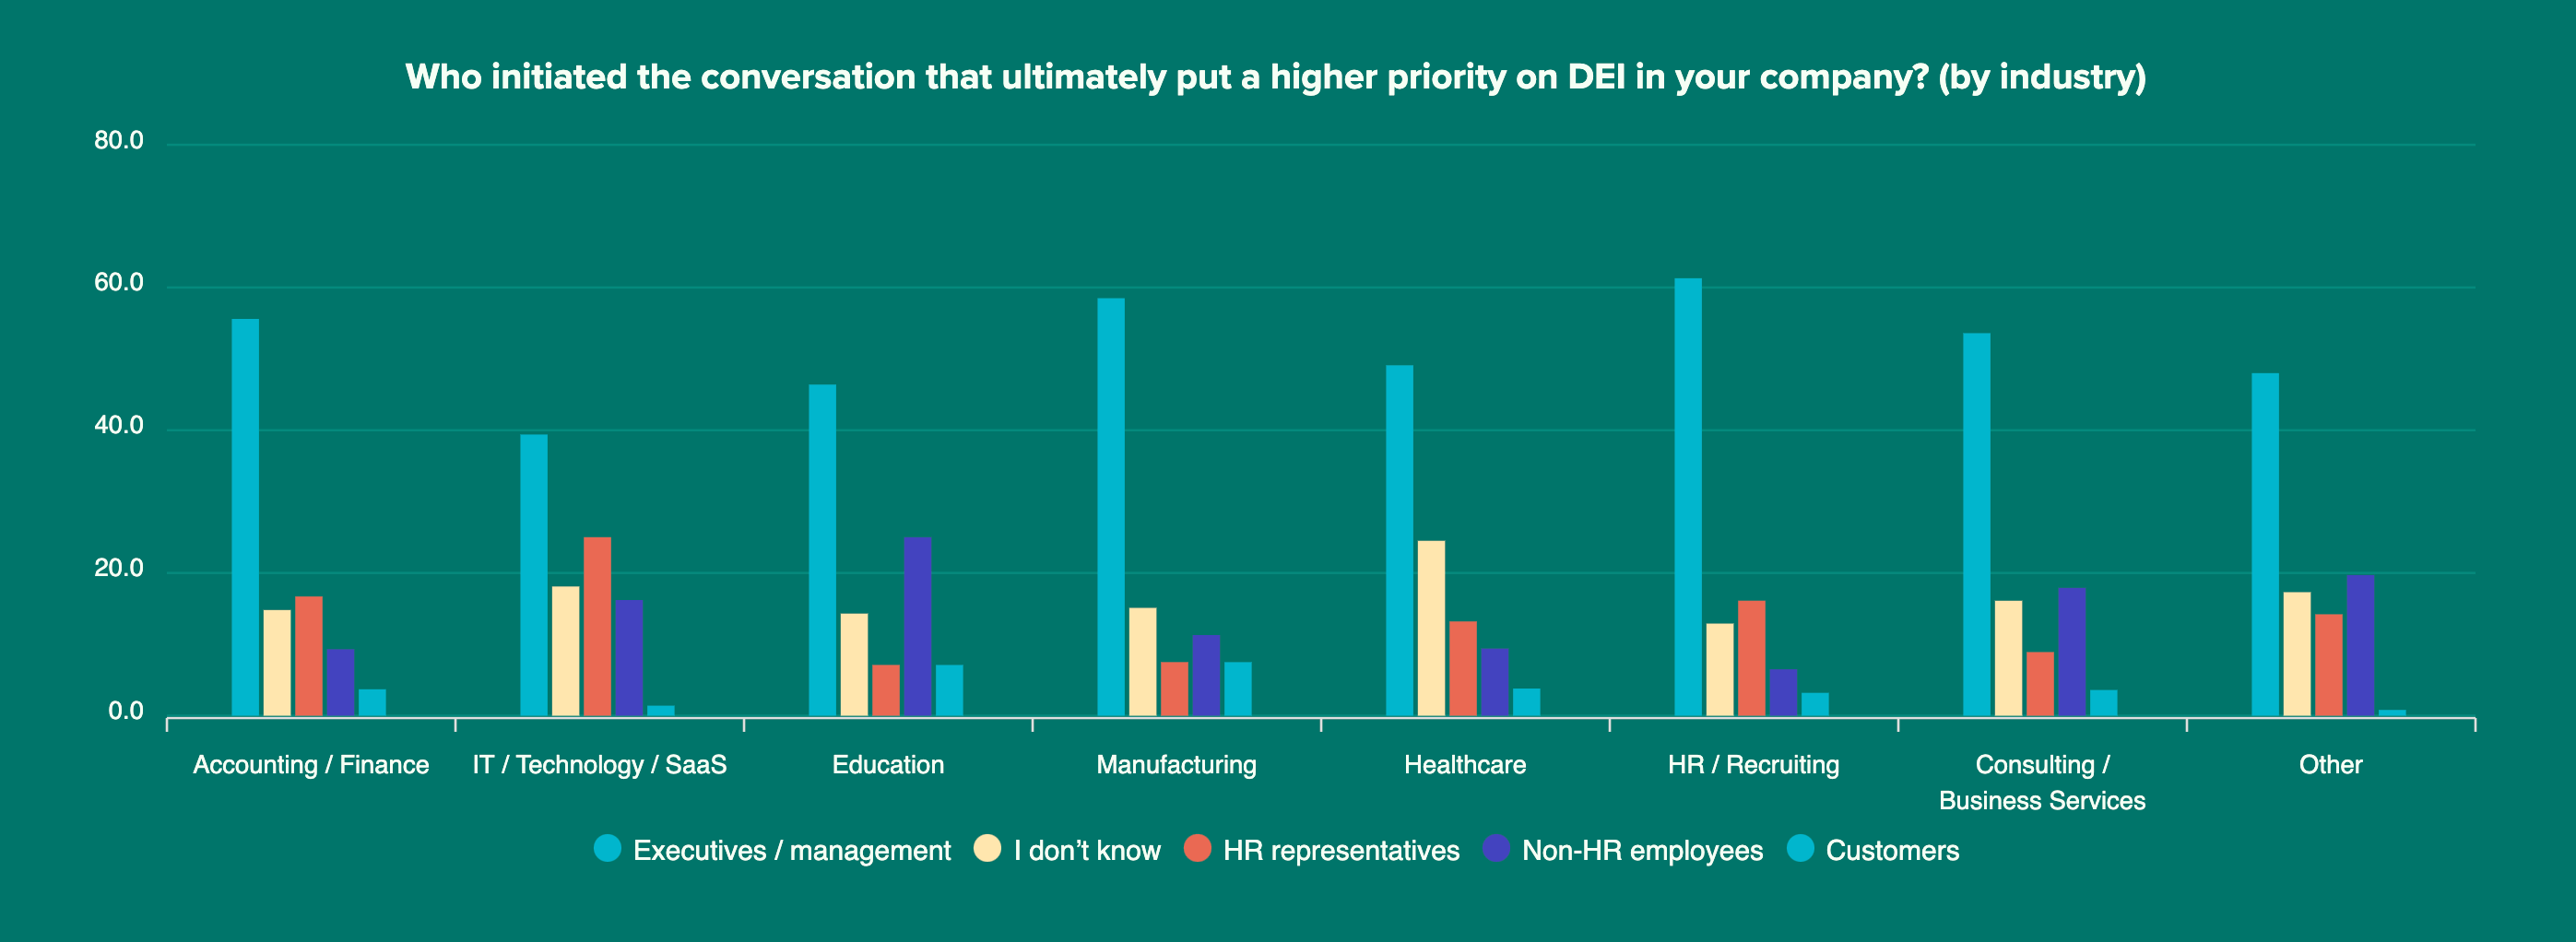 Who initiated the conversation that ultimately put a higher priority on DEI in your company_ (by industry)